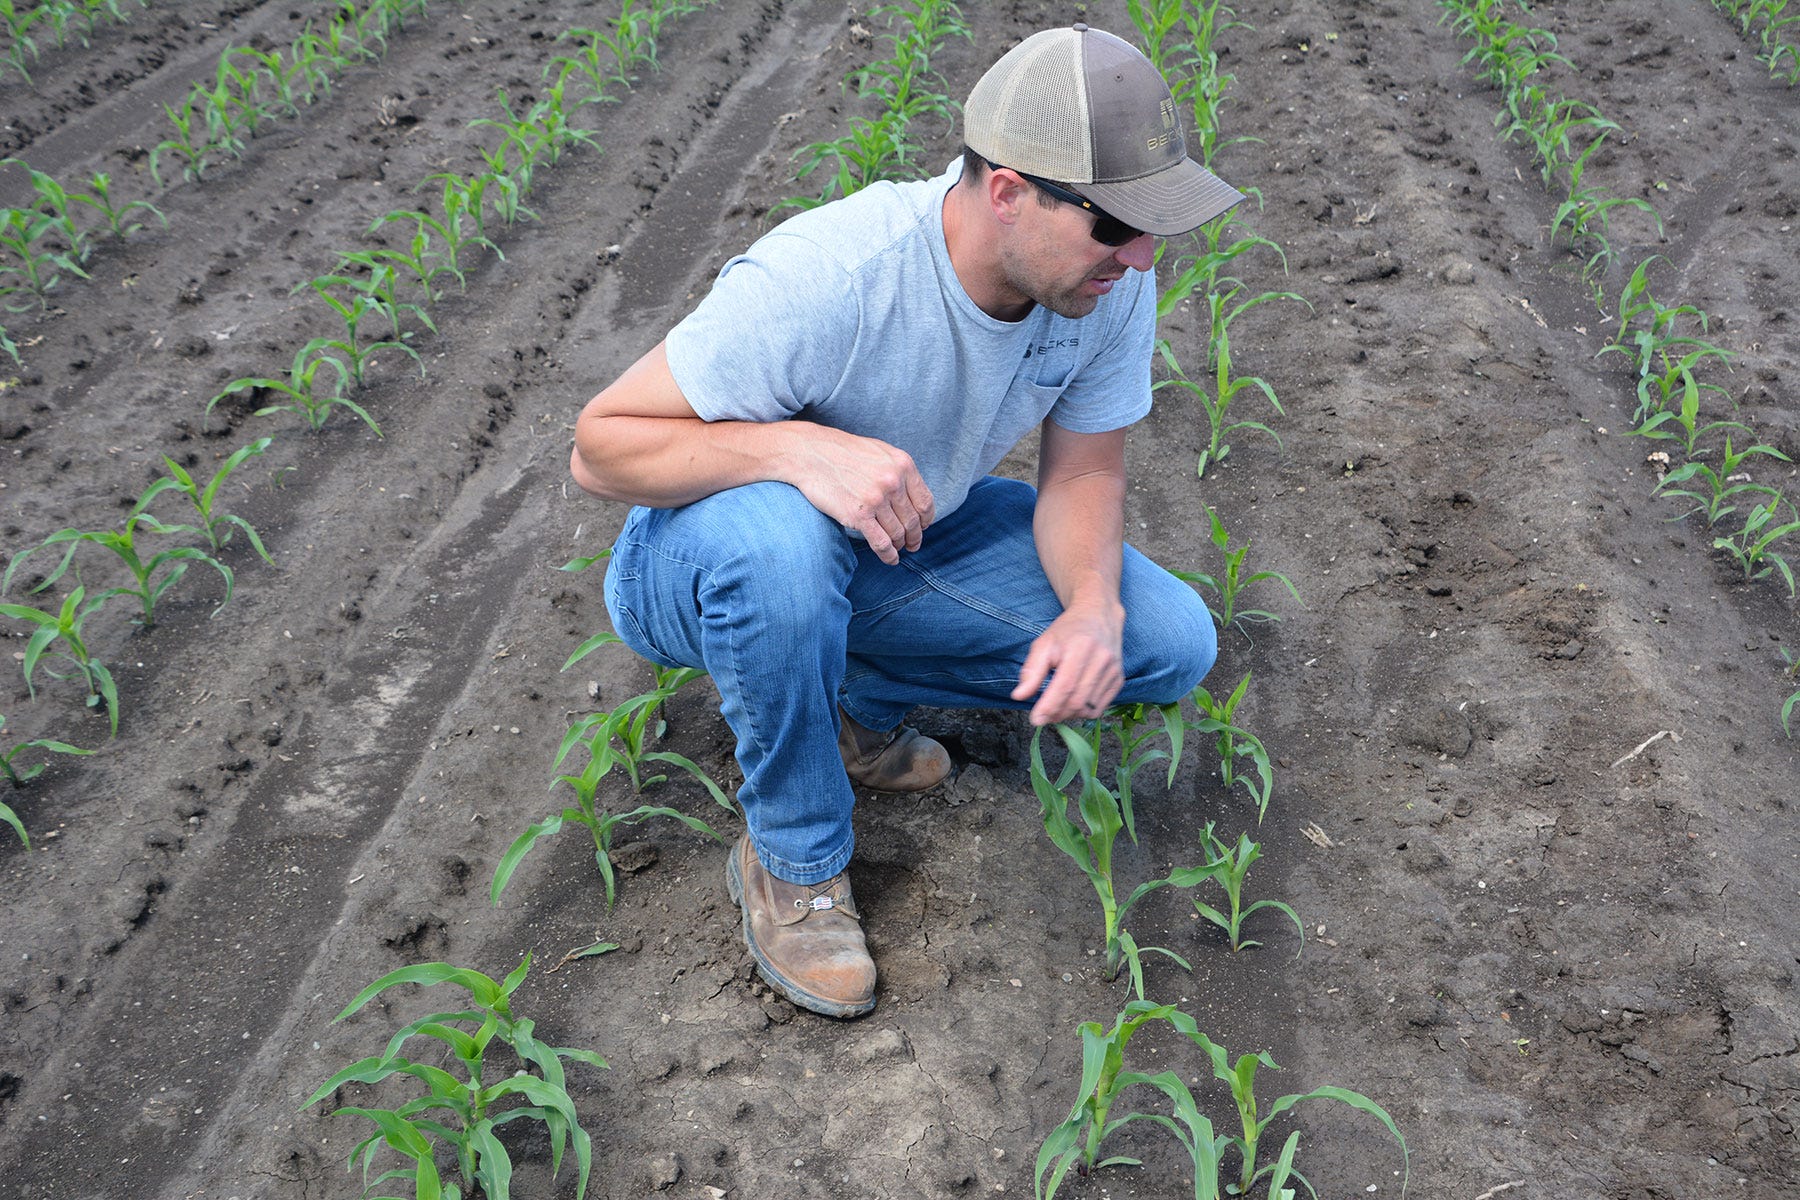 A man kneeling down next to rows of corn plants